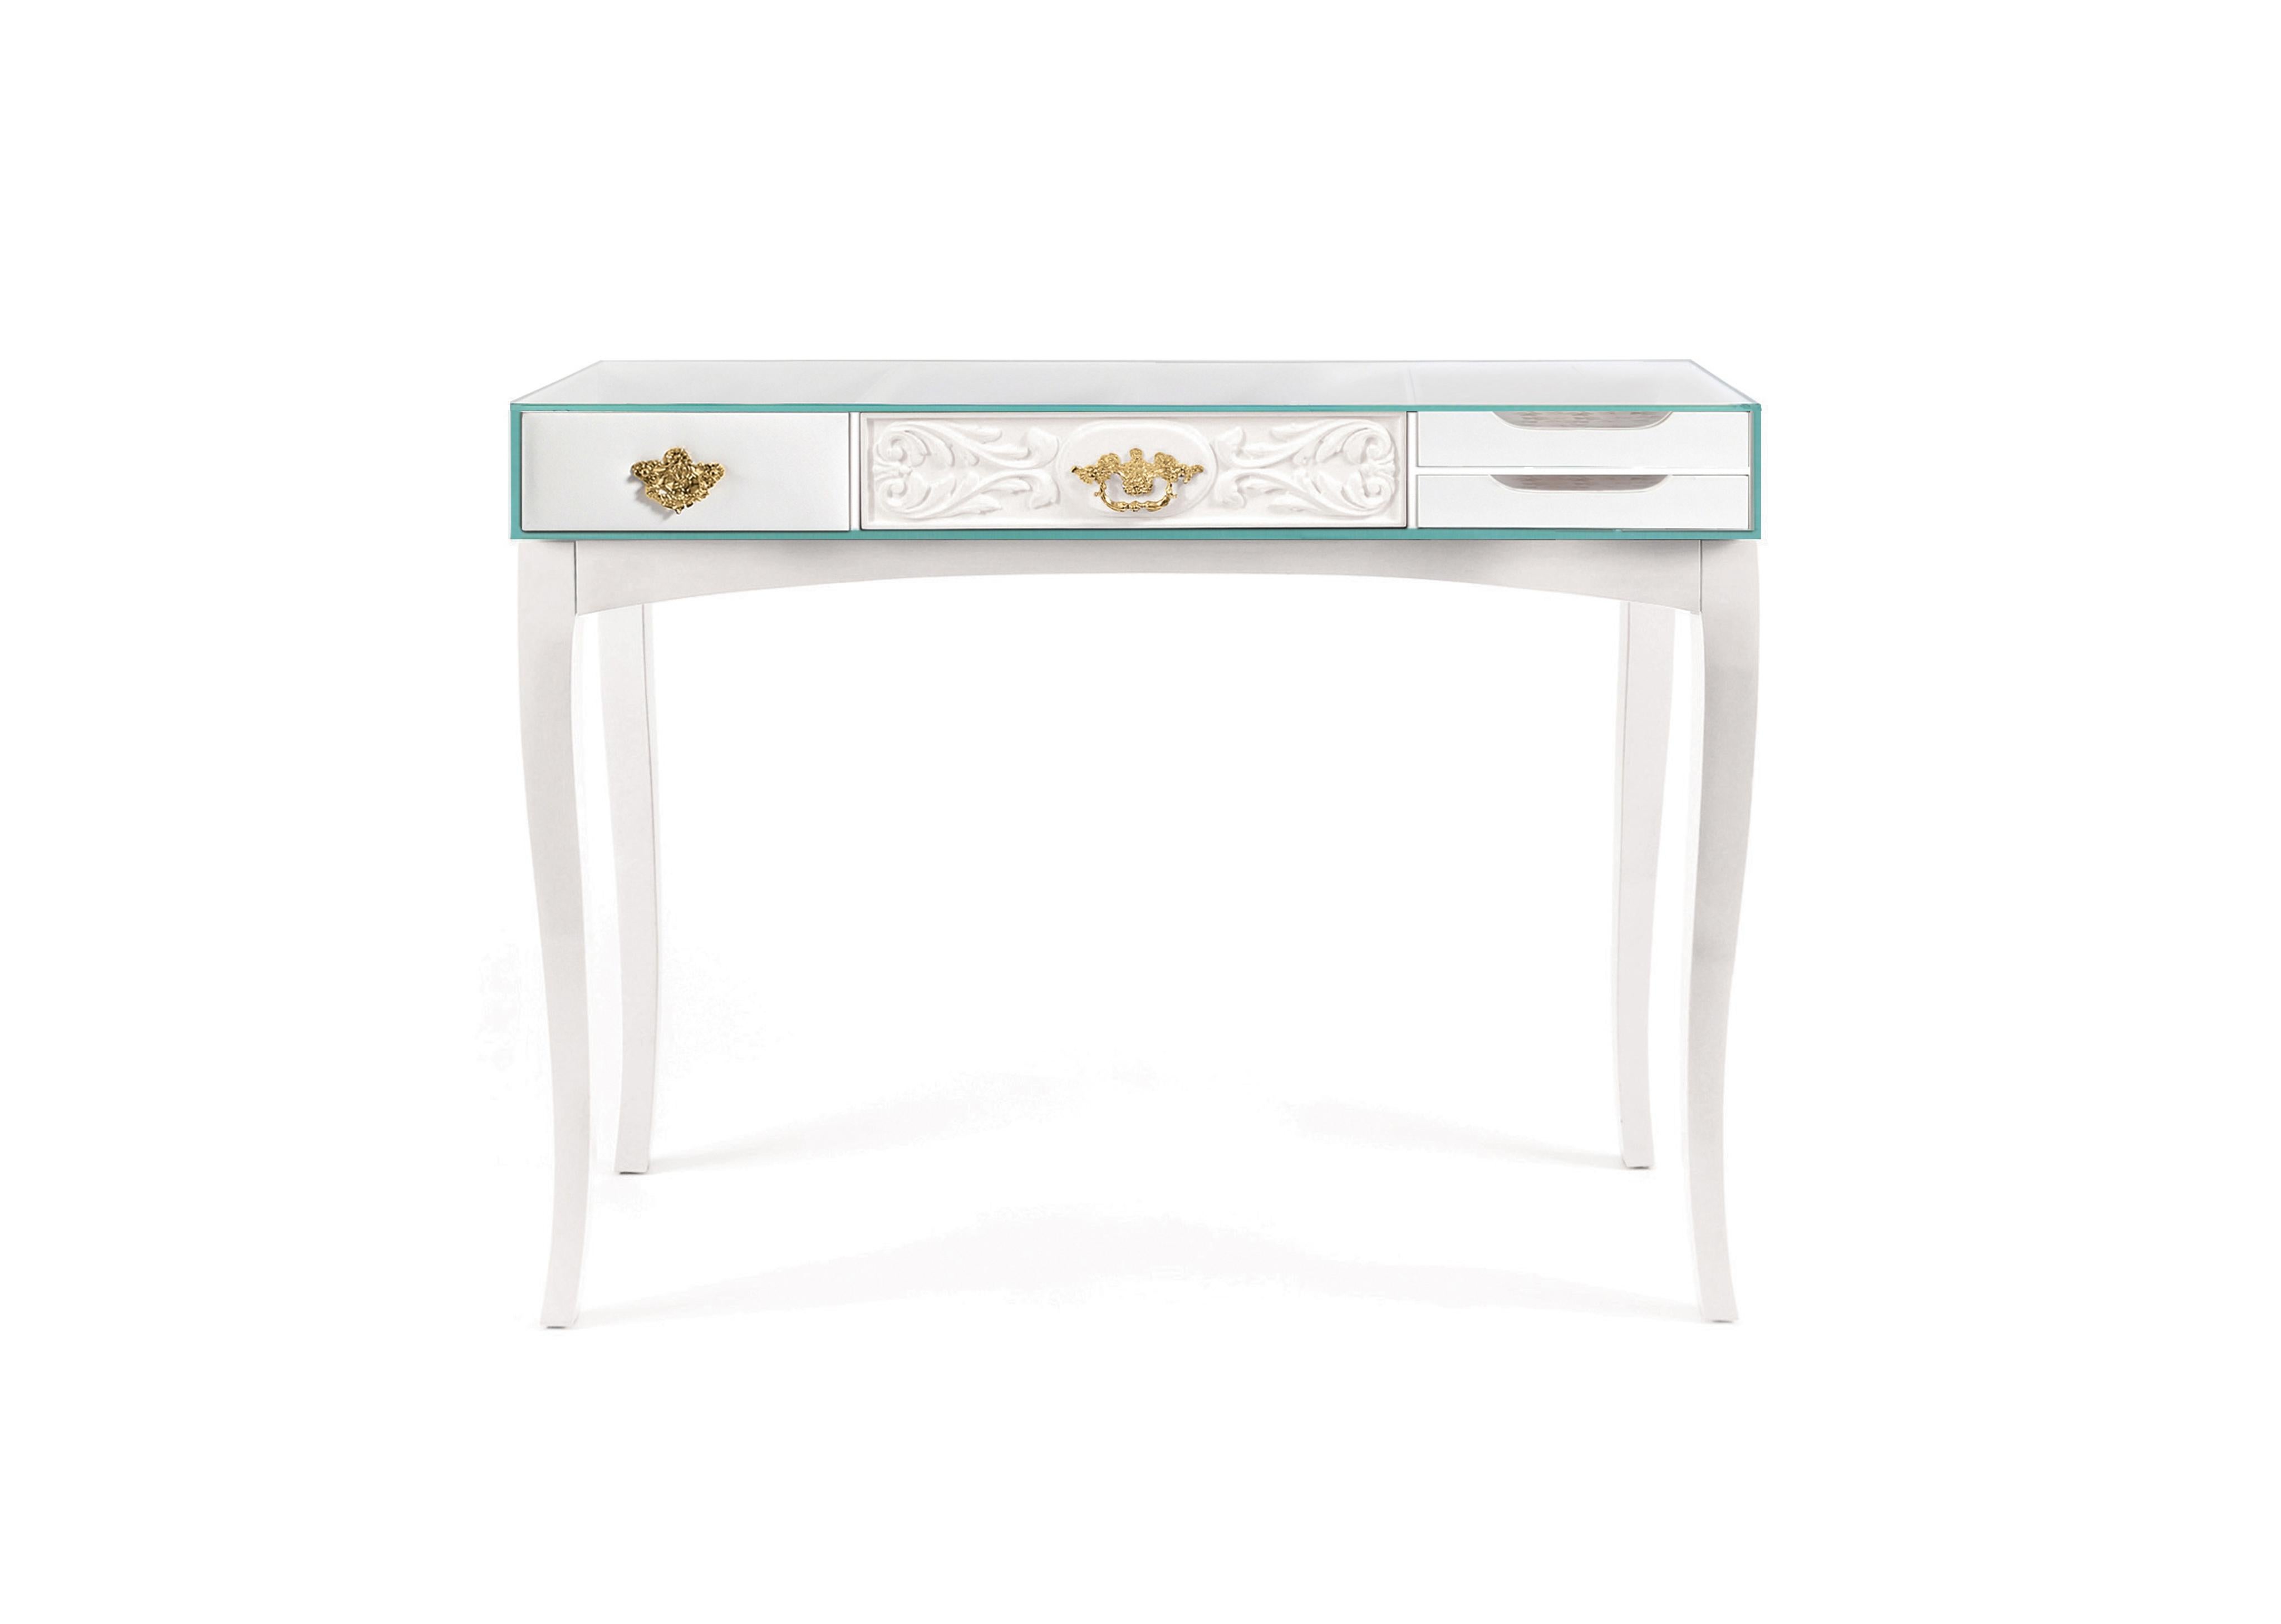 Soho console, a tribute to Soho sideboard, has been launched by Boca do Lobo. A collection of wood drawers finished in mirror and black glass with etched detailing, gold leaf, diamond matched rosewood veneer, high gloss blue or pink lacquer and